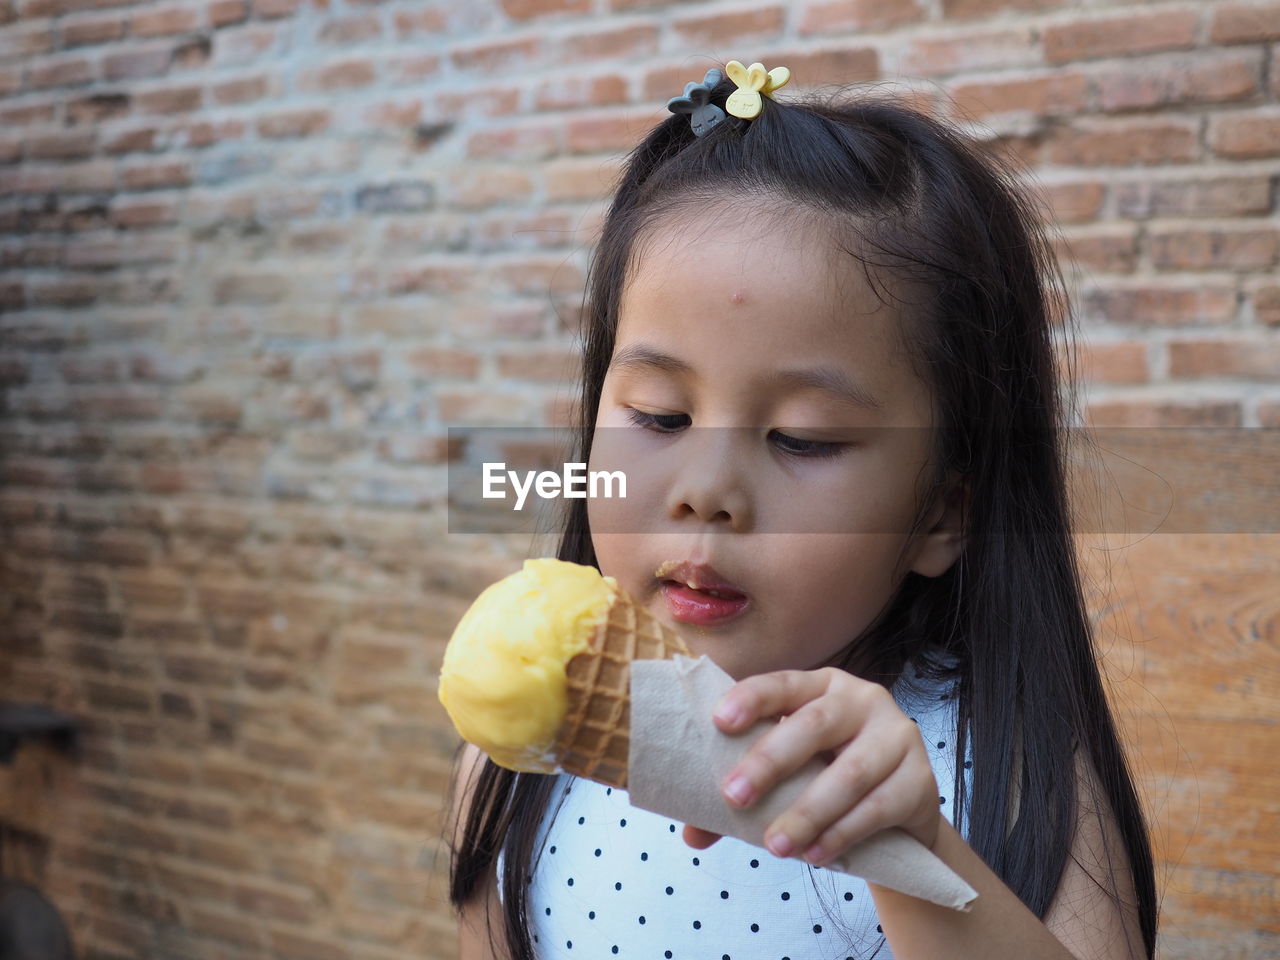 Portrait of girl holding ice cream against wall